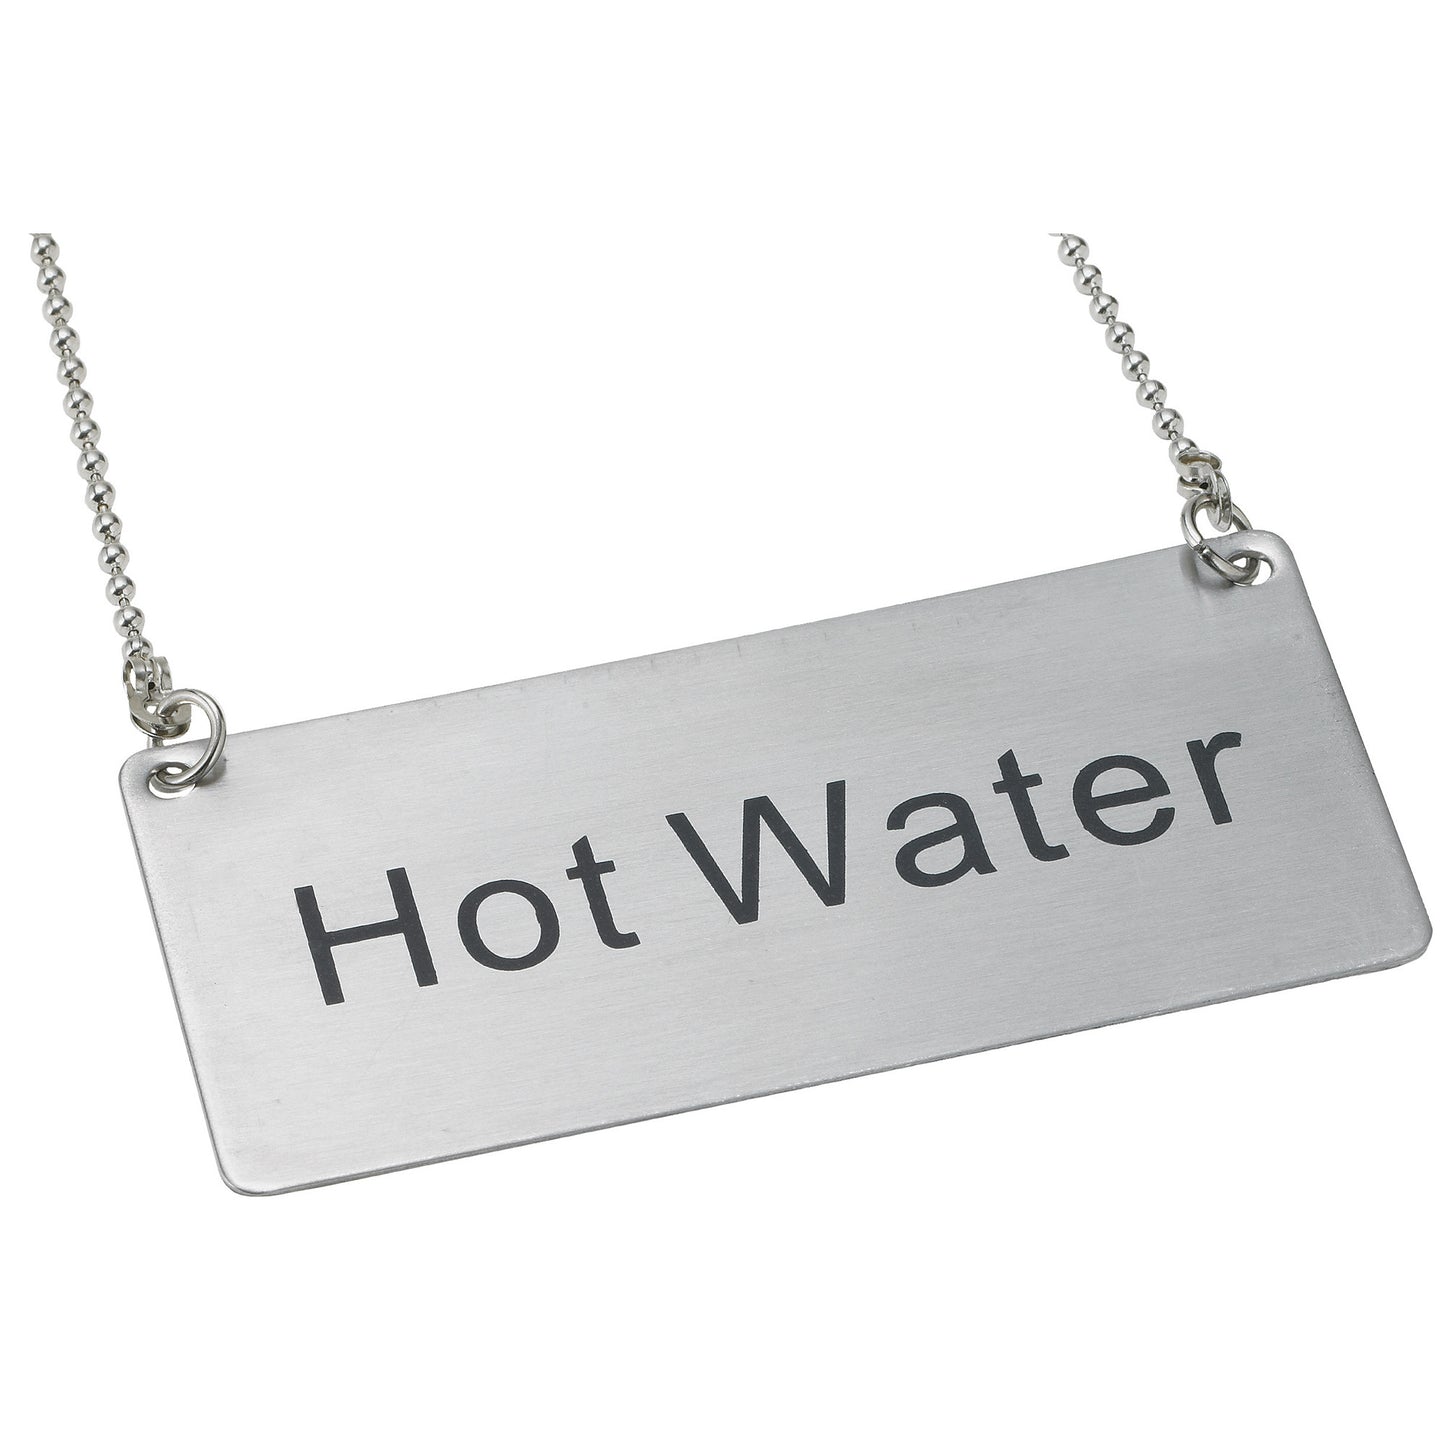 SGN-204 - Chain Sign, Stainless Steel - Hot Water